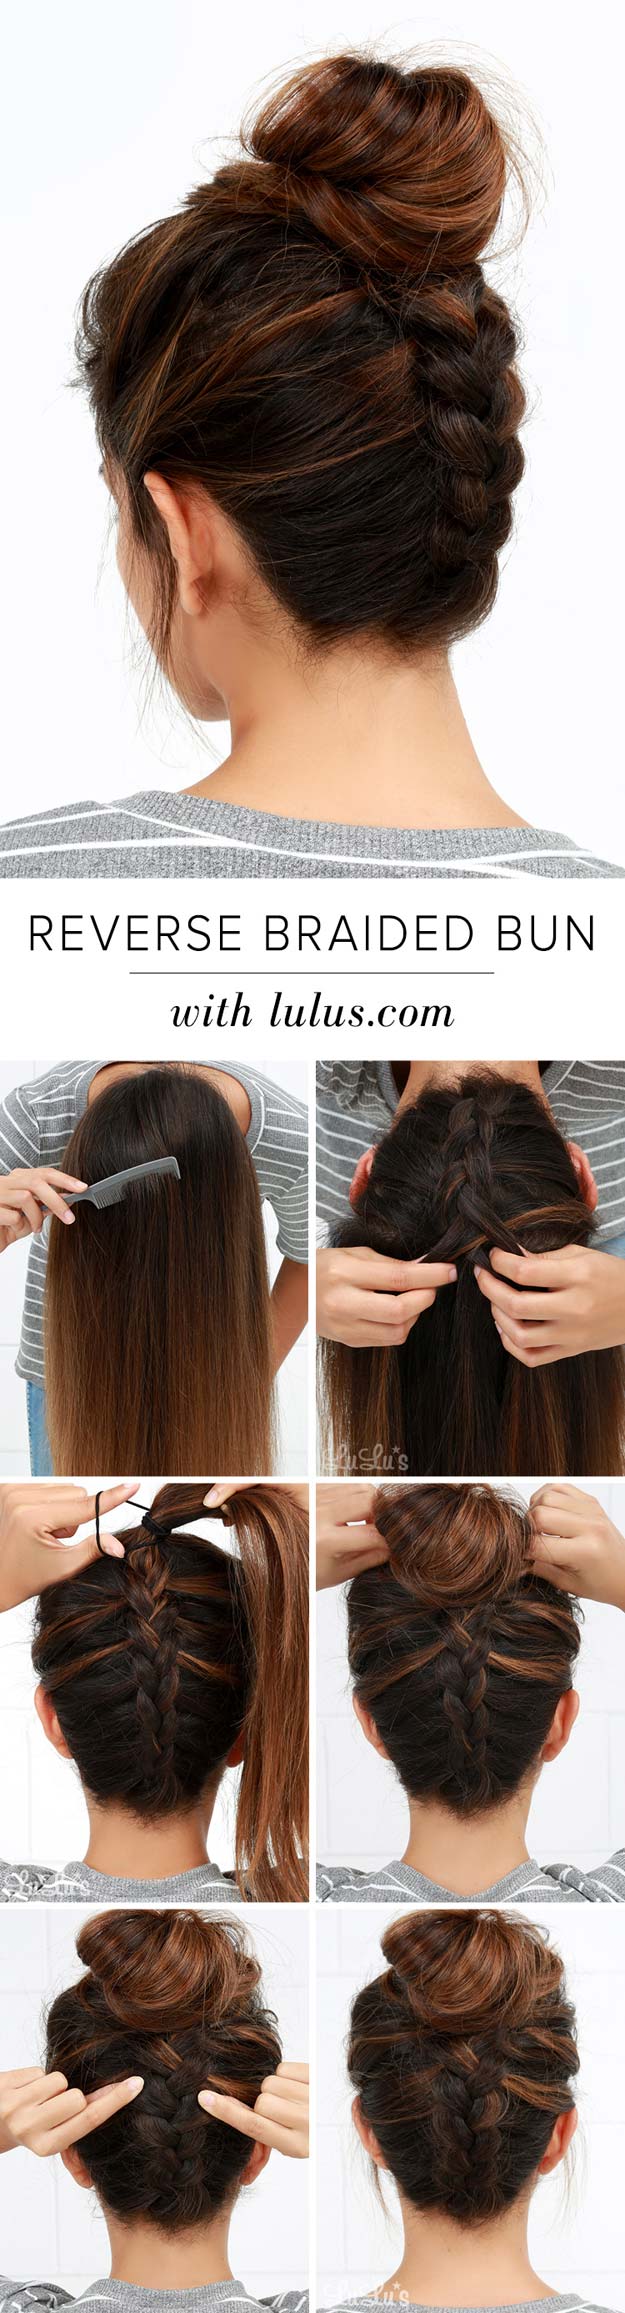 Cool and Easy DIY Hairstyles - Reversed Braided Bun - Quick and Easy Ideas for Back to School Styles for Medium, Short and Long Hair - Fun Tips and Best Step by Step Tutorials for Teens, Prom, Weddings, Special Occasions and Work. Up dos, Braids, Top Knots and Buns, Super Summer Looks #hairstyles #hair #teens #easyhairstyles #diy #beauty